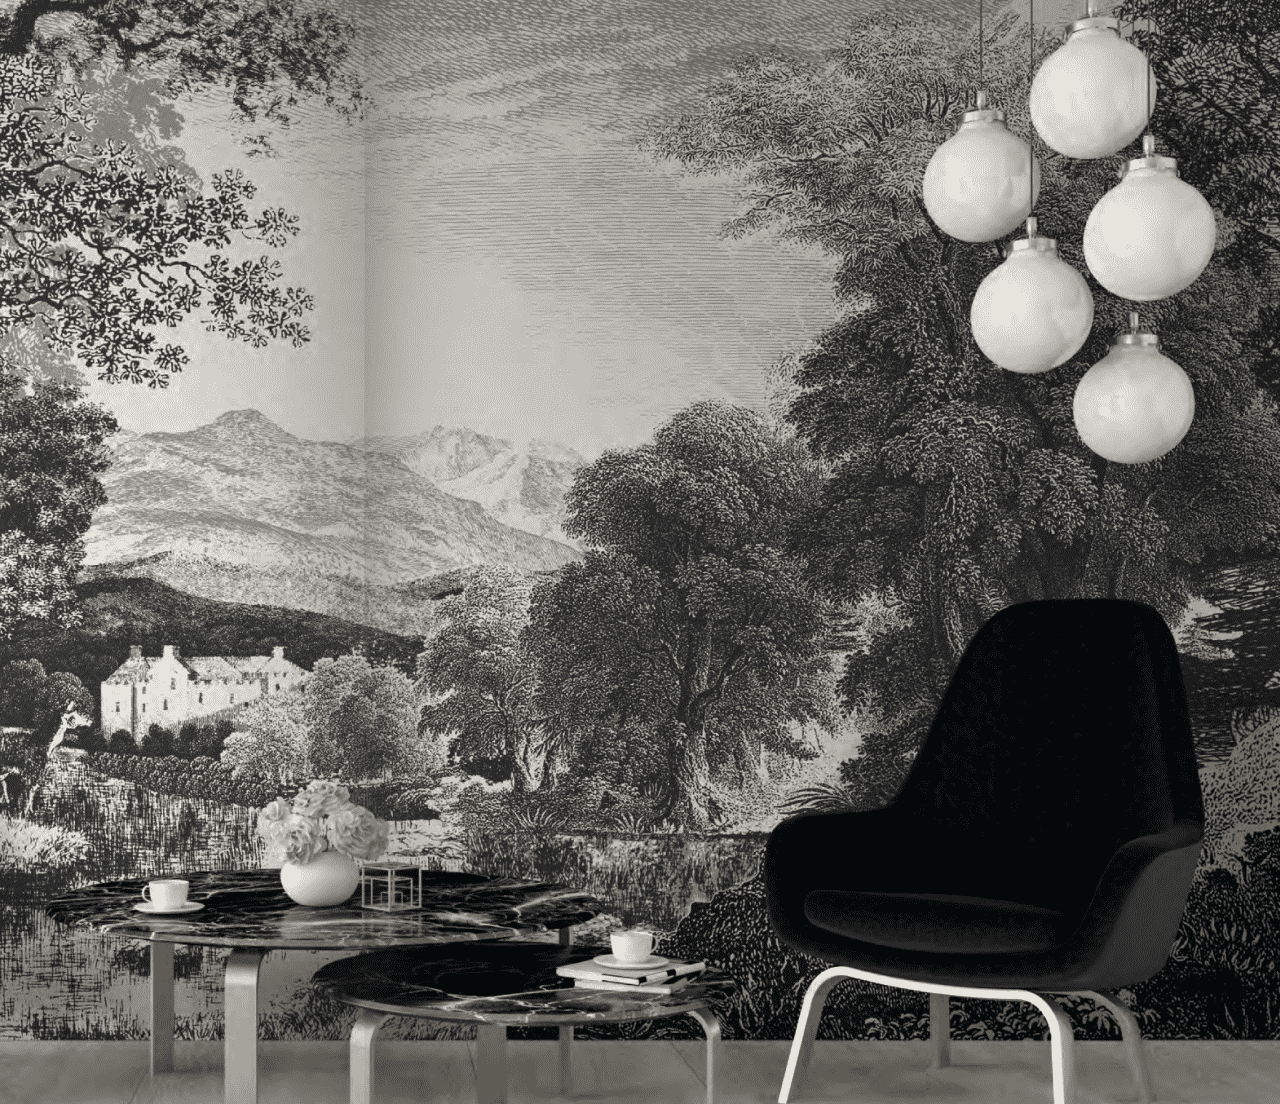 Black and white wallpaper with a nature scene of mountains and trees, some furniture in front of the wall.